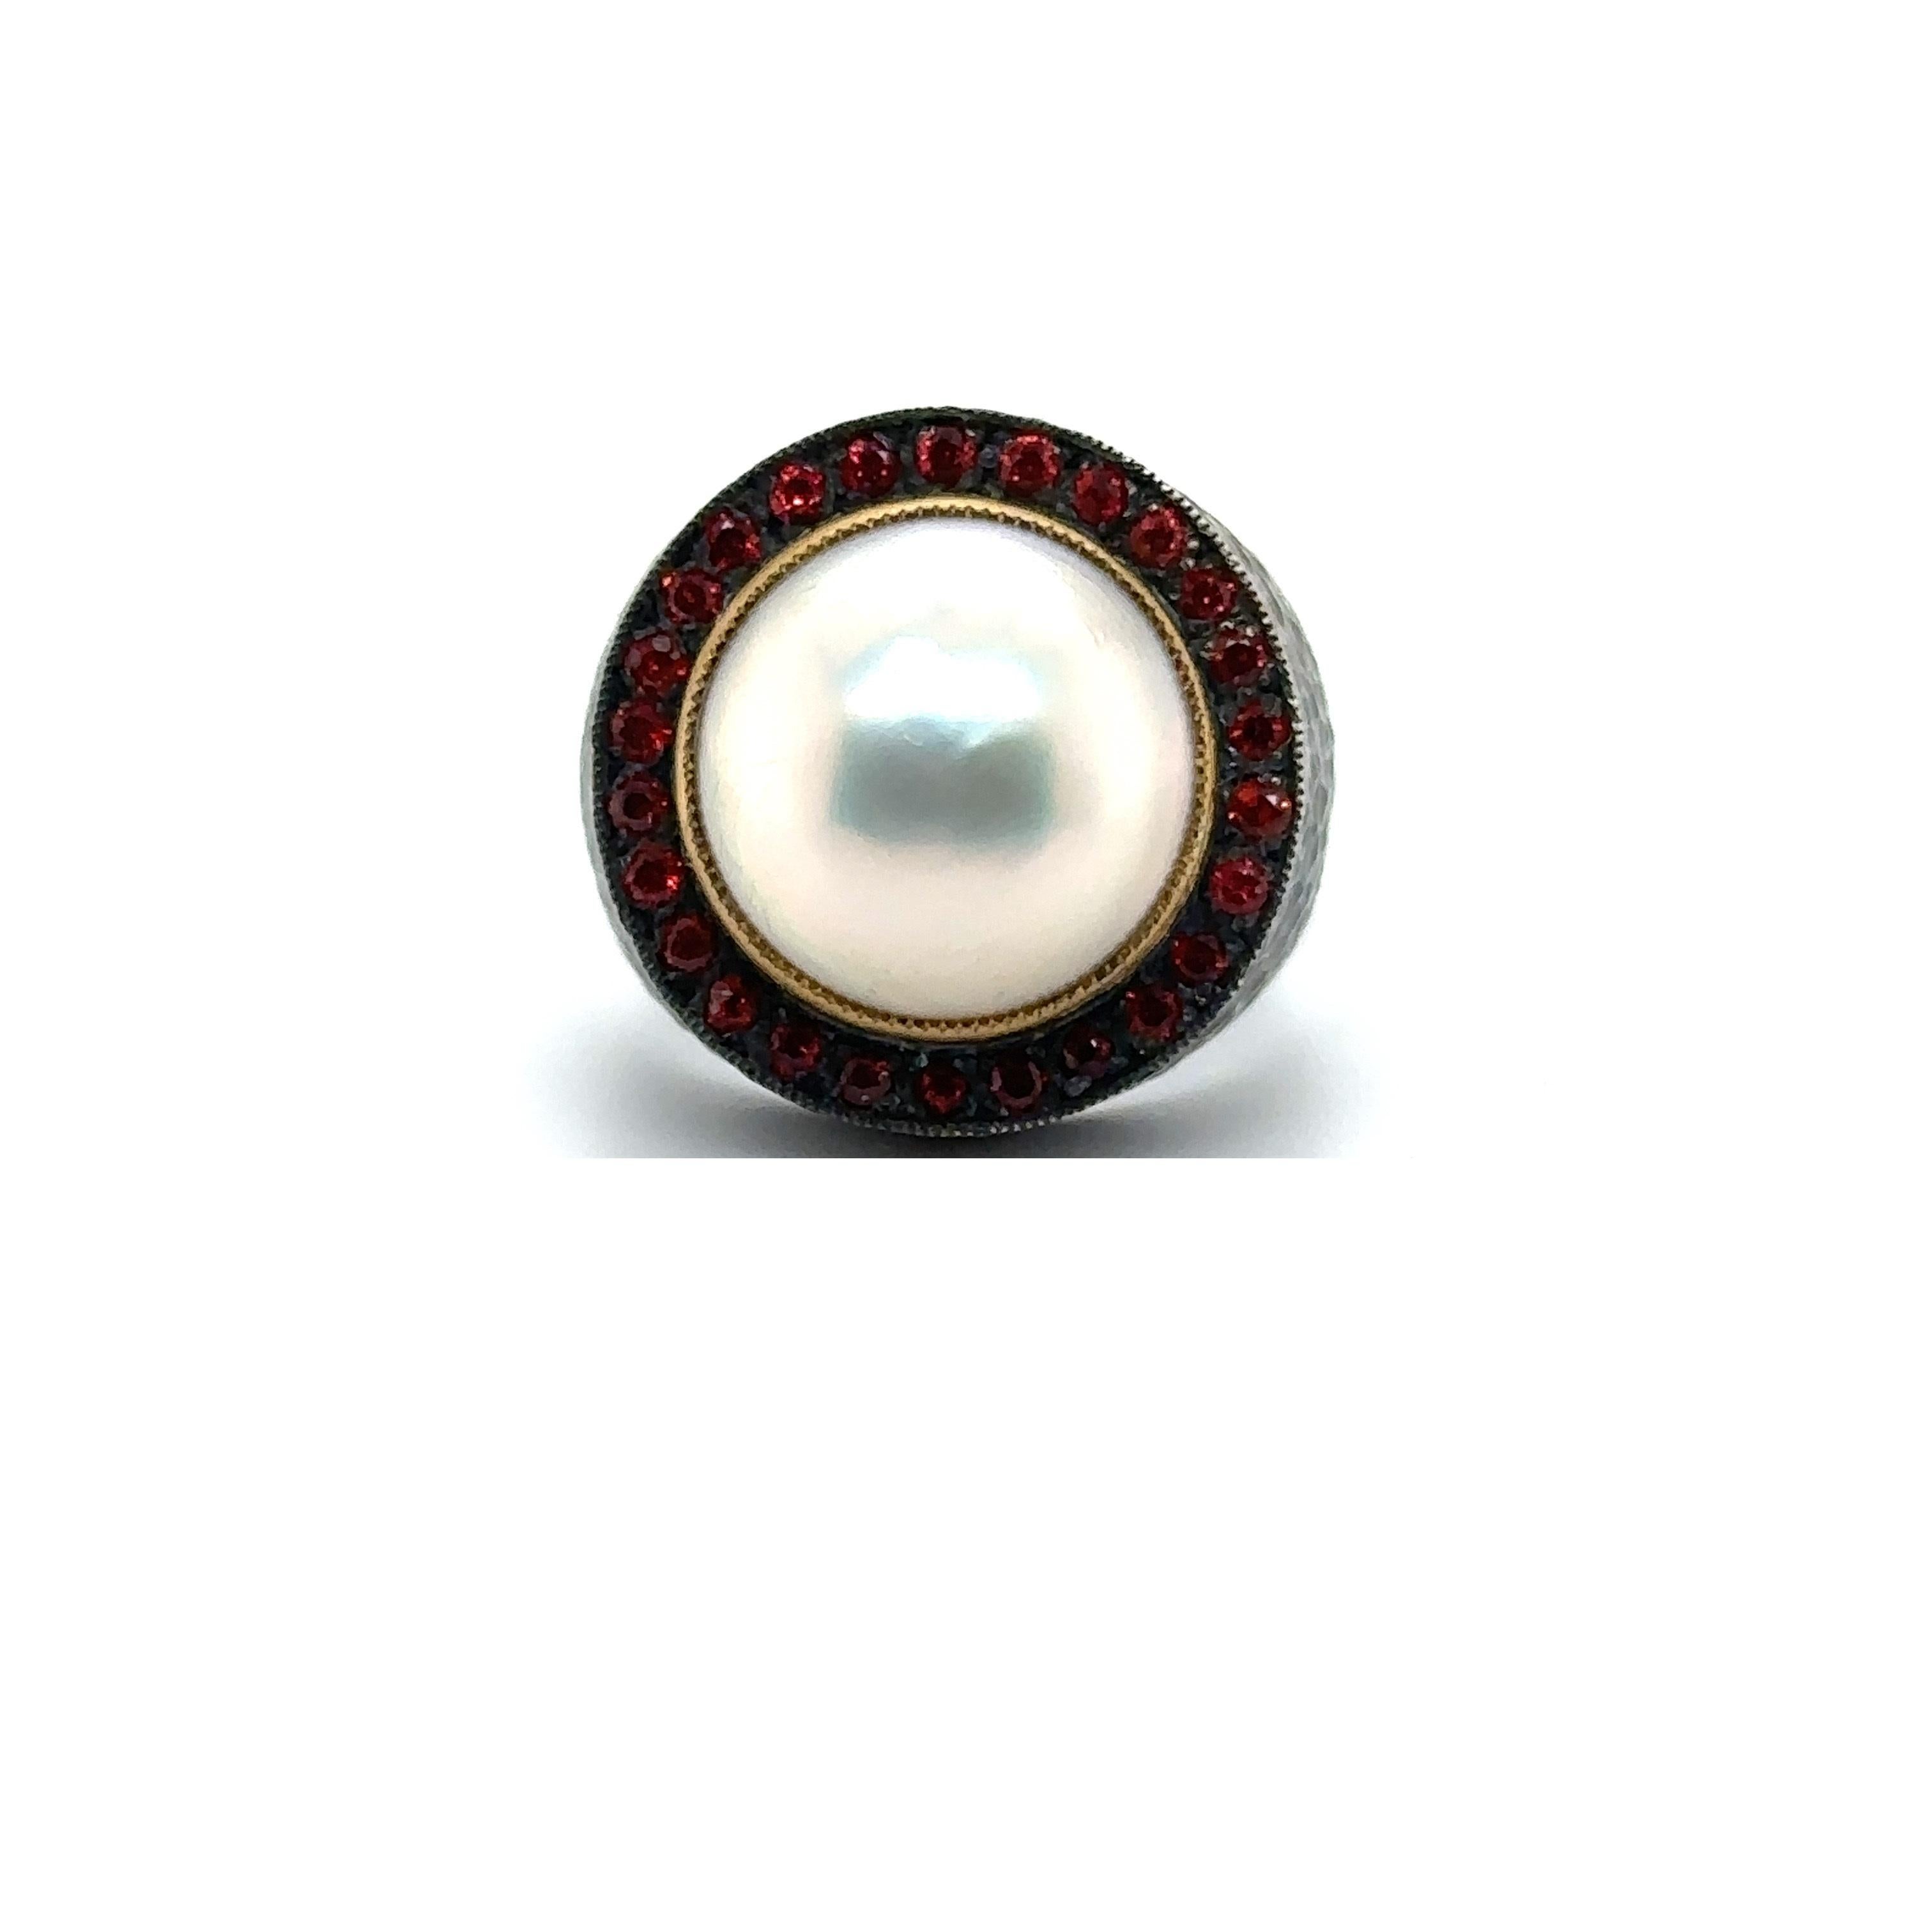 JAS-19-1971 - 24KT GOLD/SS 13MM MABE RING with 0.60CT RED SAPPHIRES For Sale 6